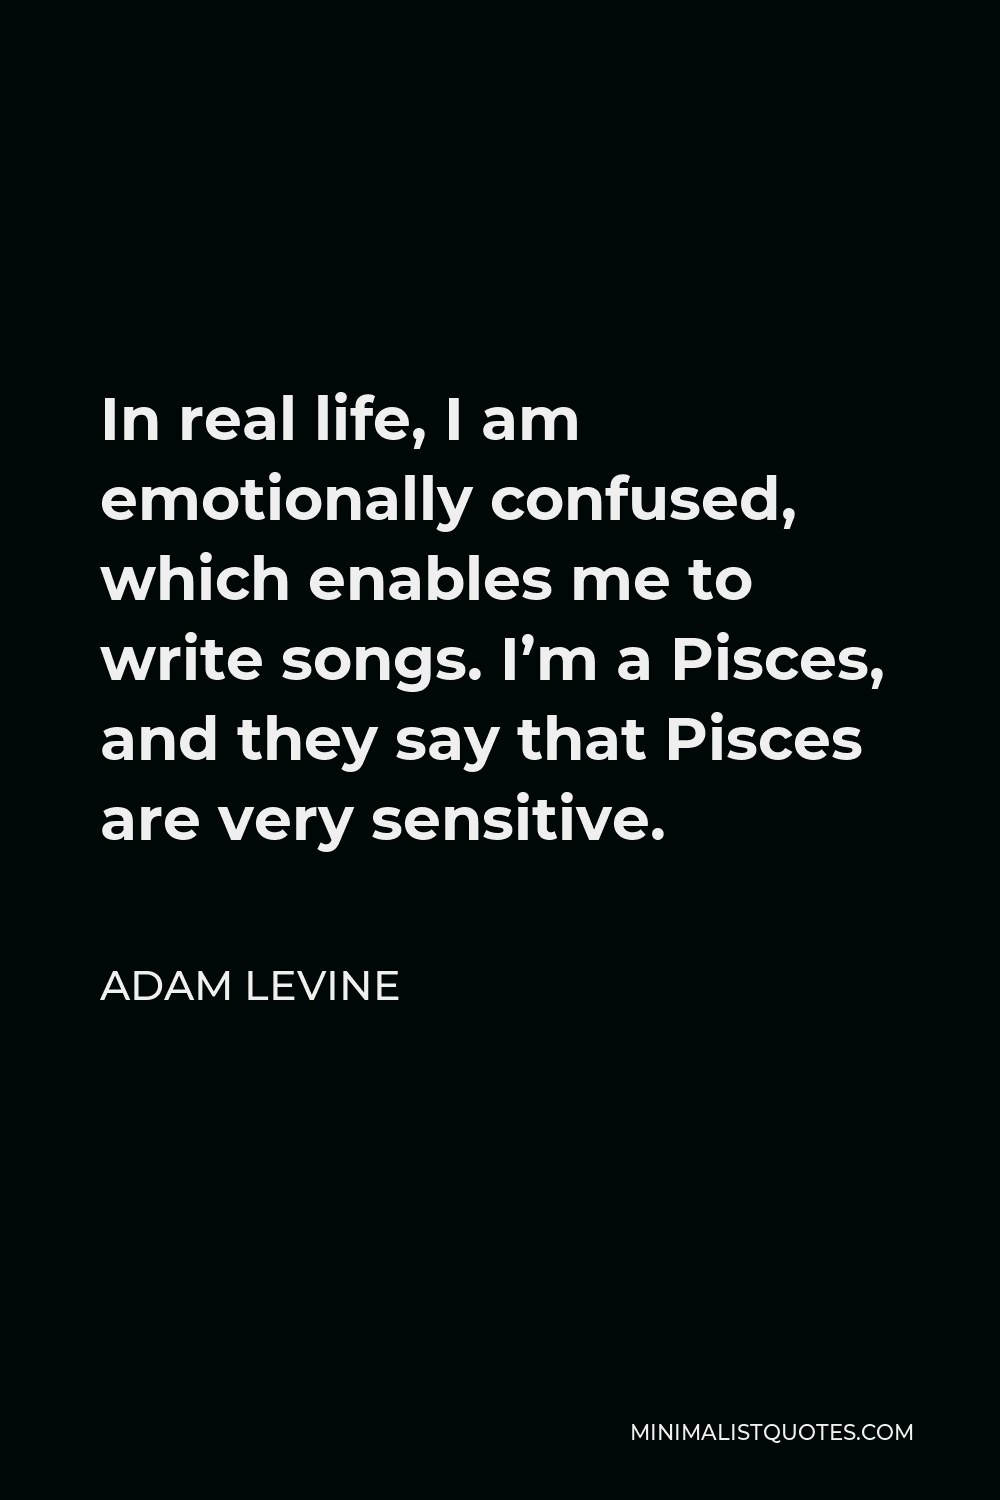 Adam Levine Quote - In real life, I am emotionally confused, which enables me to write songs. I’m a Pisces, and they say that Pisces are very sensitive.